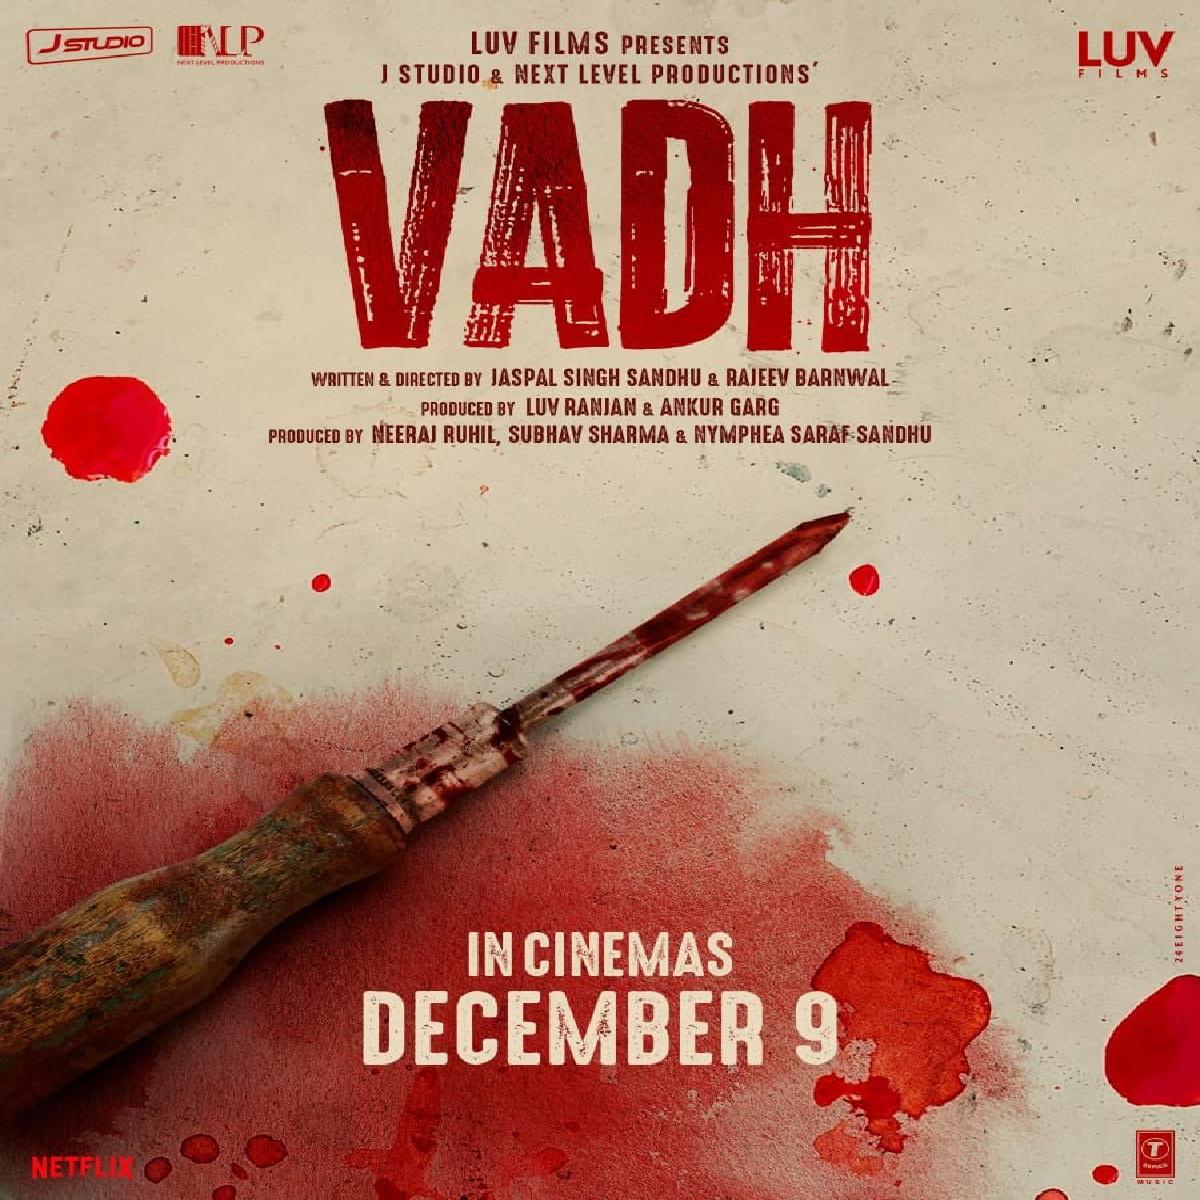 Neena Gupta And Sanjay Mishra Starrer Vadh Gets A Release Date